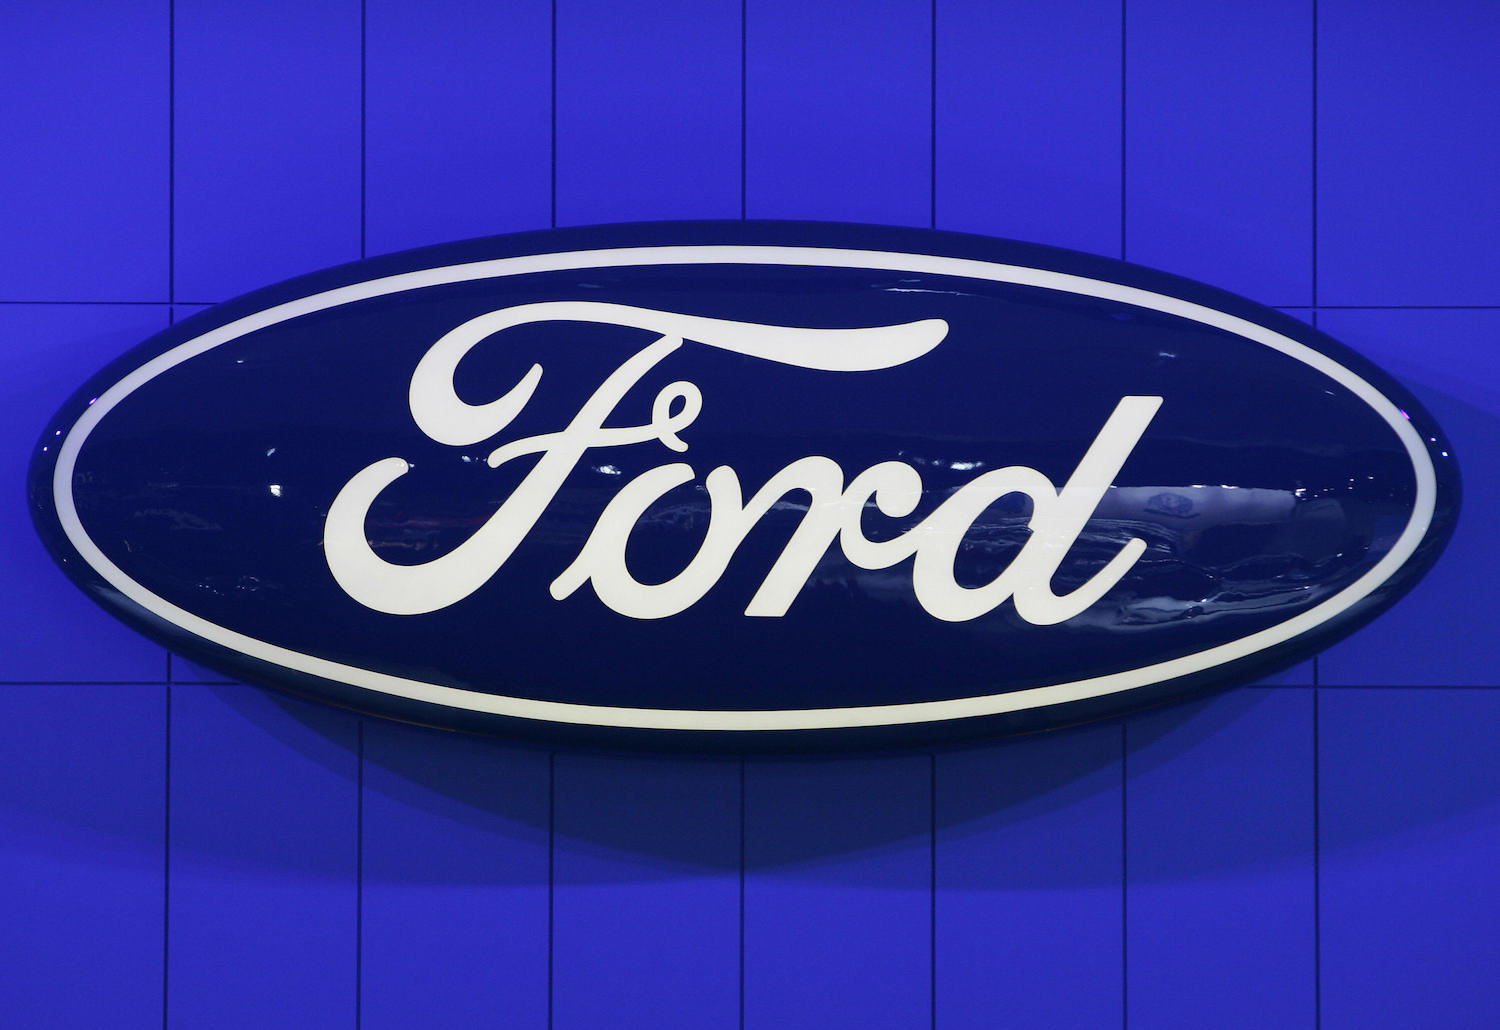 Blue Ford sign hanging on a bright blue wall.